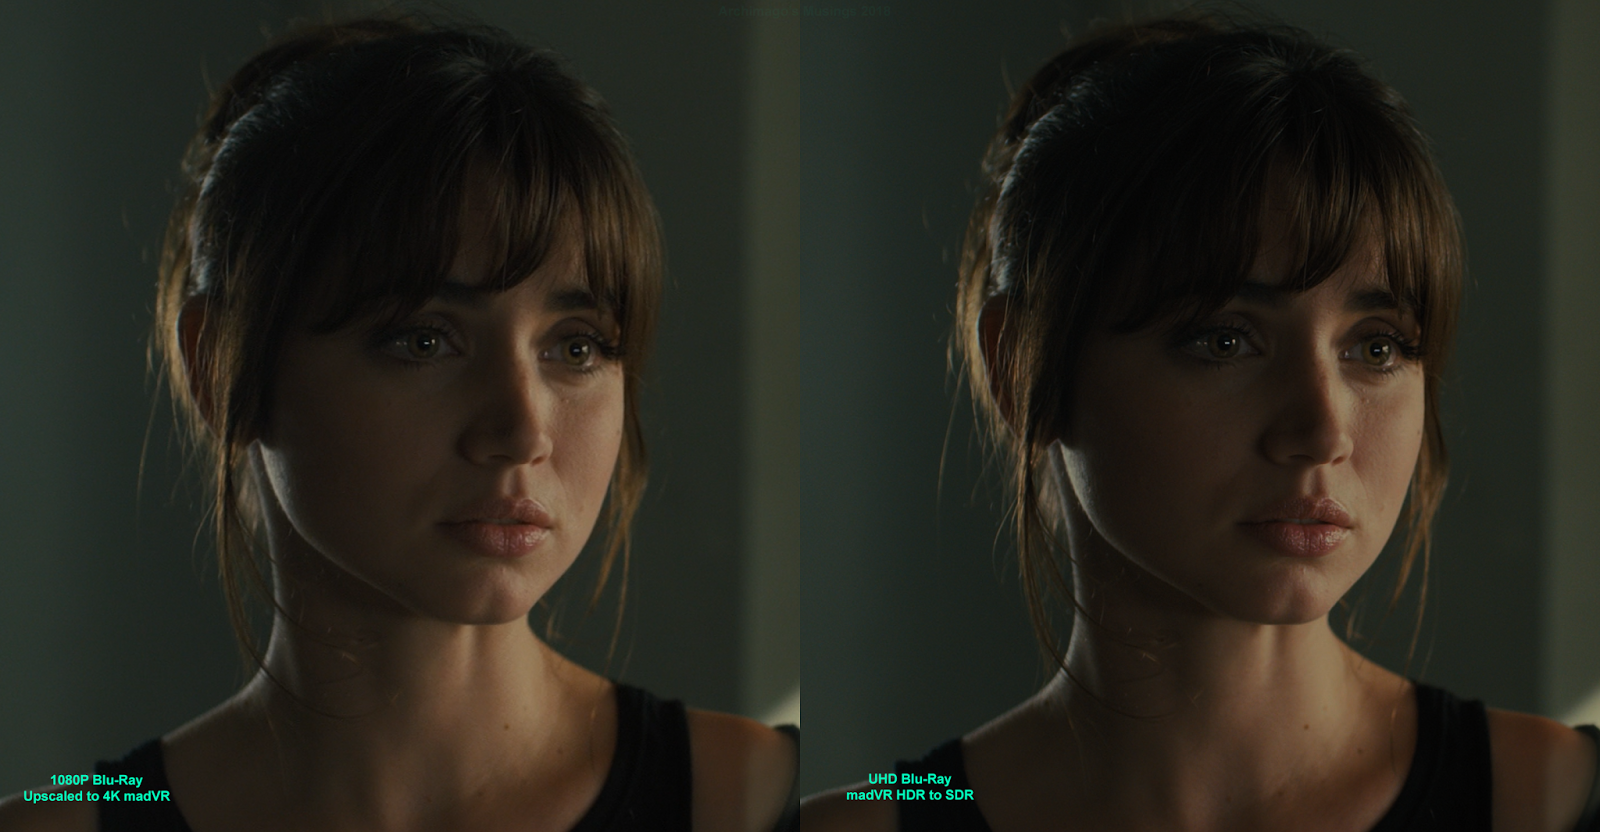 Here's Ms. Ana de Armas, the character Joi in the movie. 